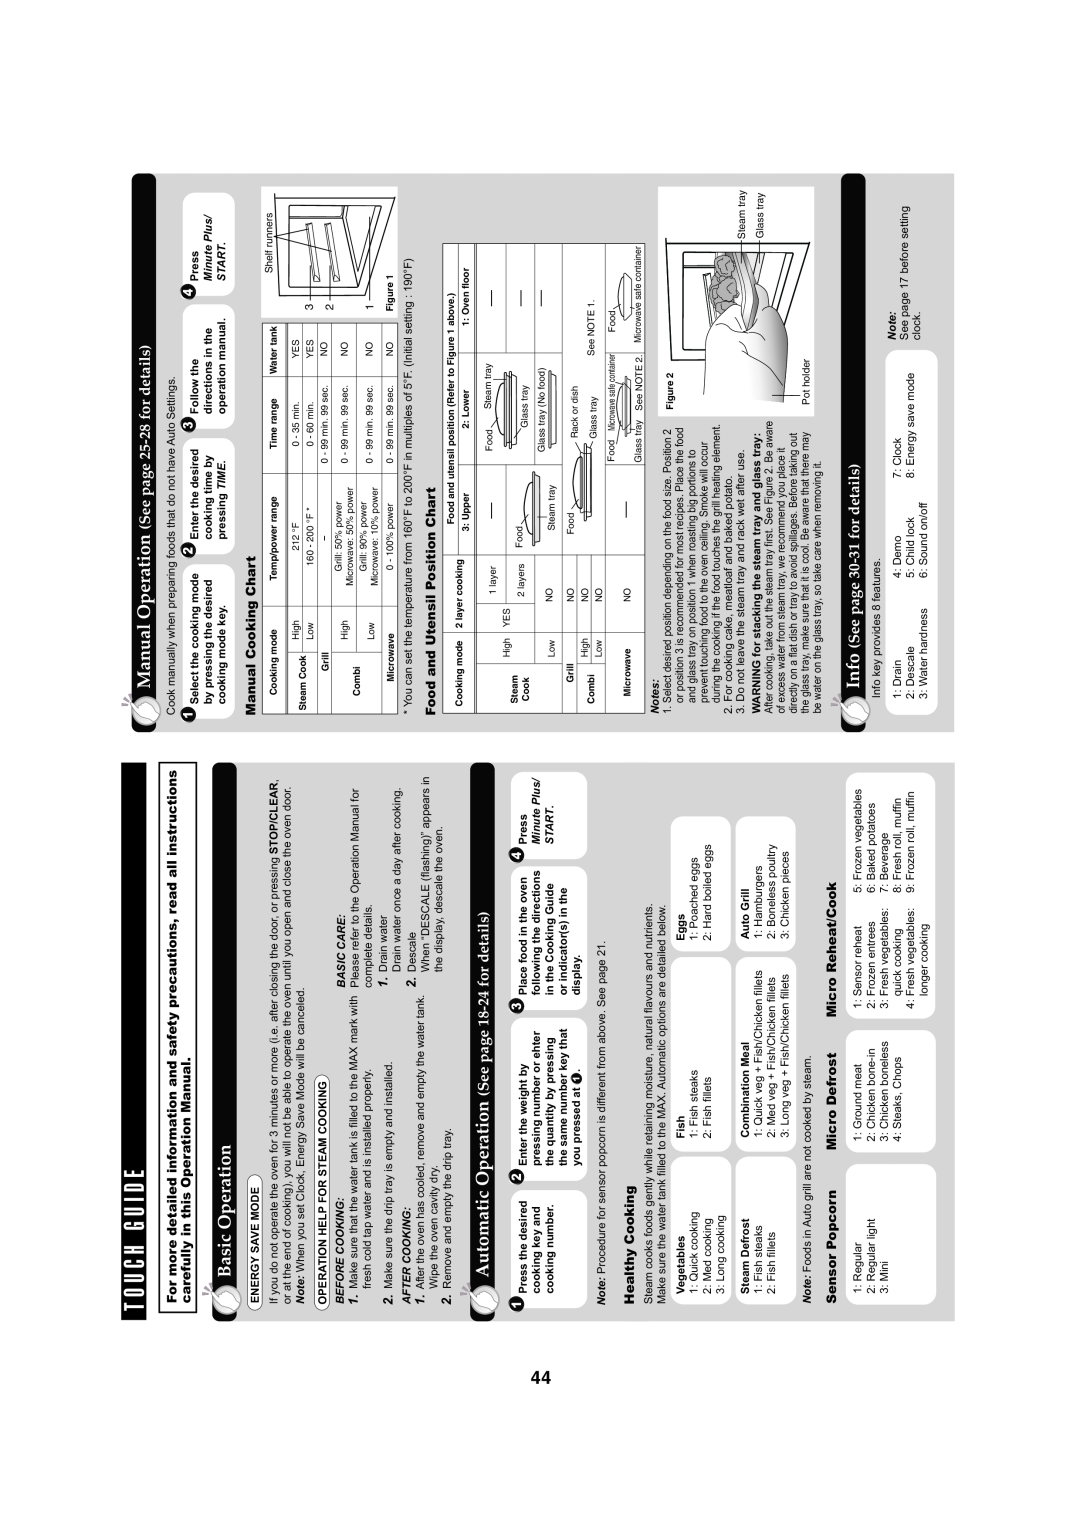 Sharp AX-1100S T O U C H G U I D E, Basic Operation, Manual Operation See page 25-28 for details, Manual Cooking Chart 